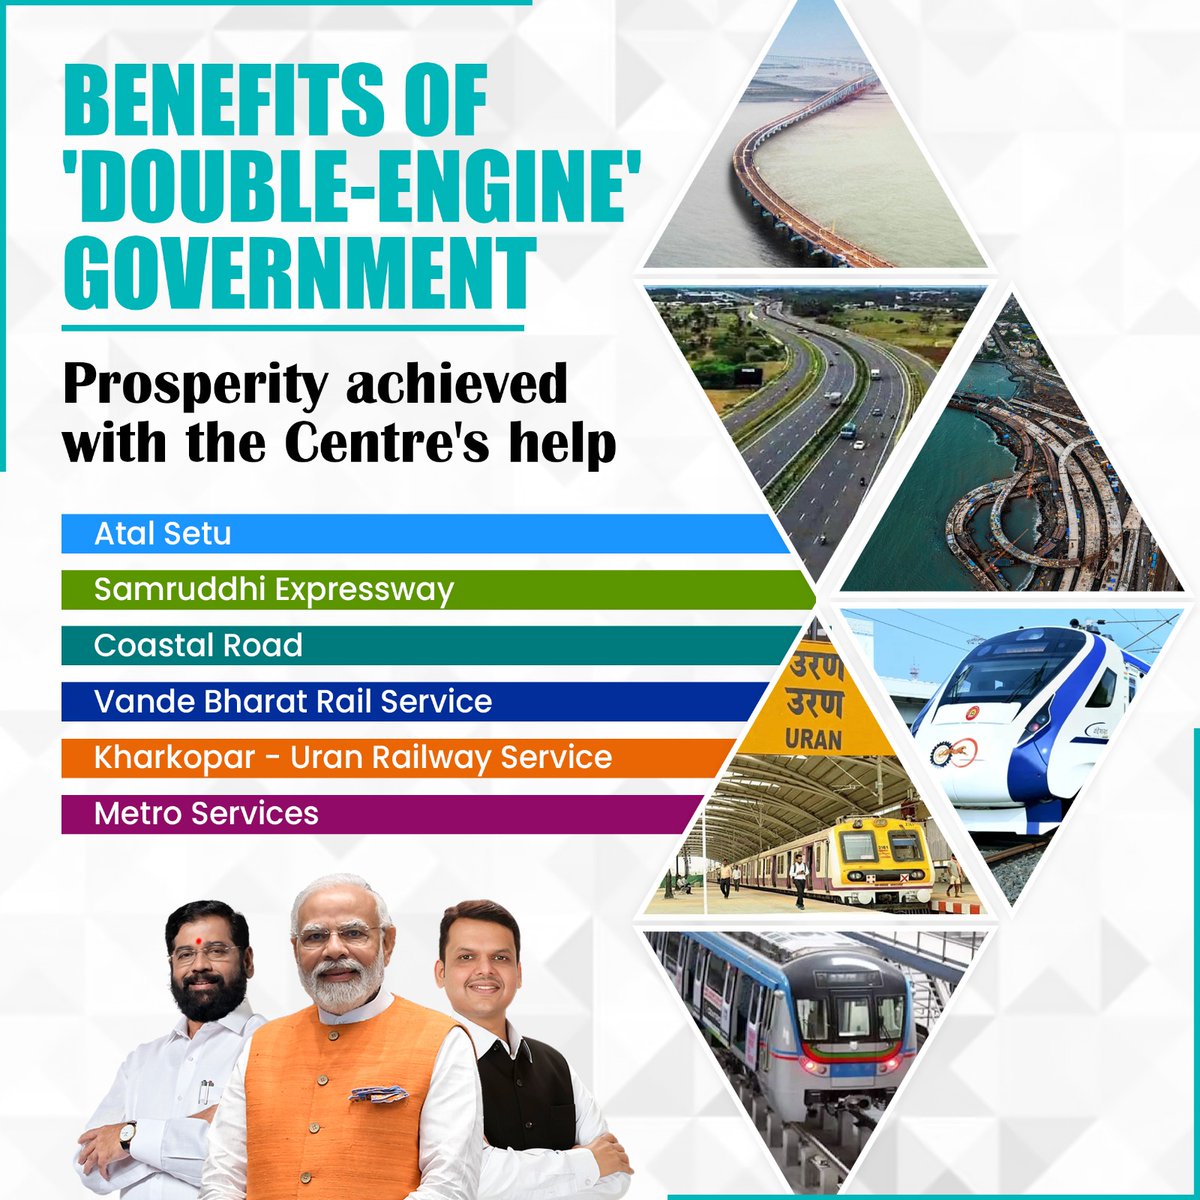 With the combined efforts of PM Modi's Central government and CM Eknath Shinde's state government, Maharashtra is on the fast track to growth! Initiatives like Vande Bharat Rail Service and Kharkopar-Uran Railway Service are revolutionizing connectivity.